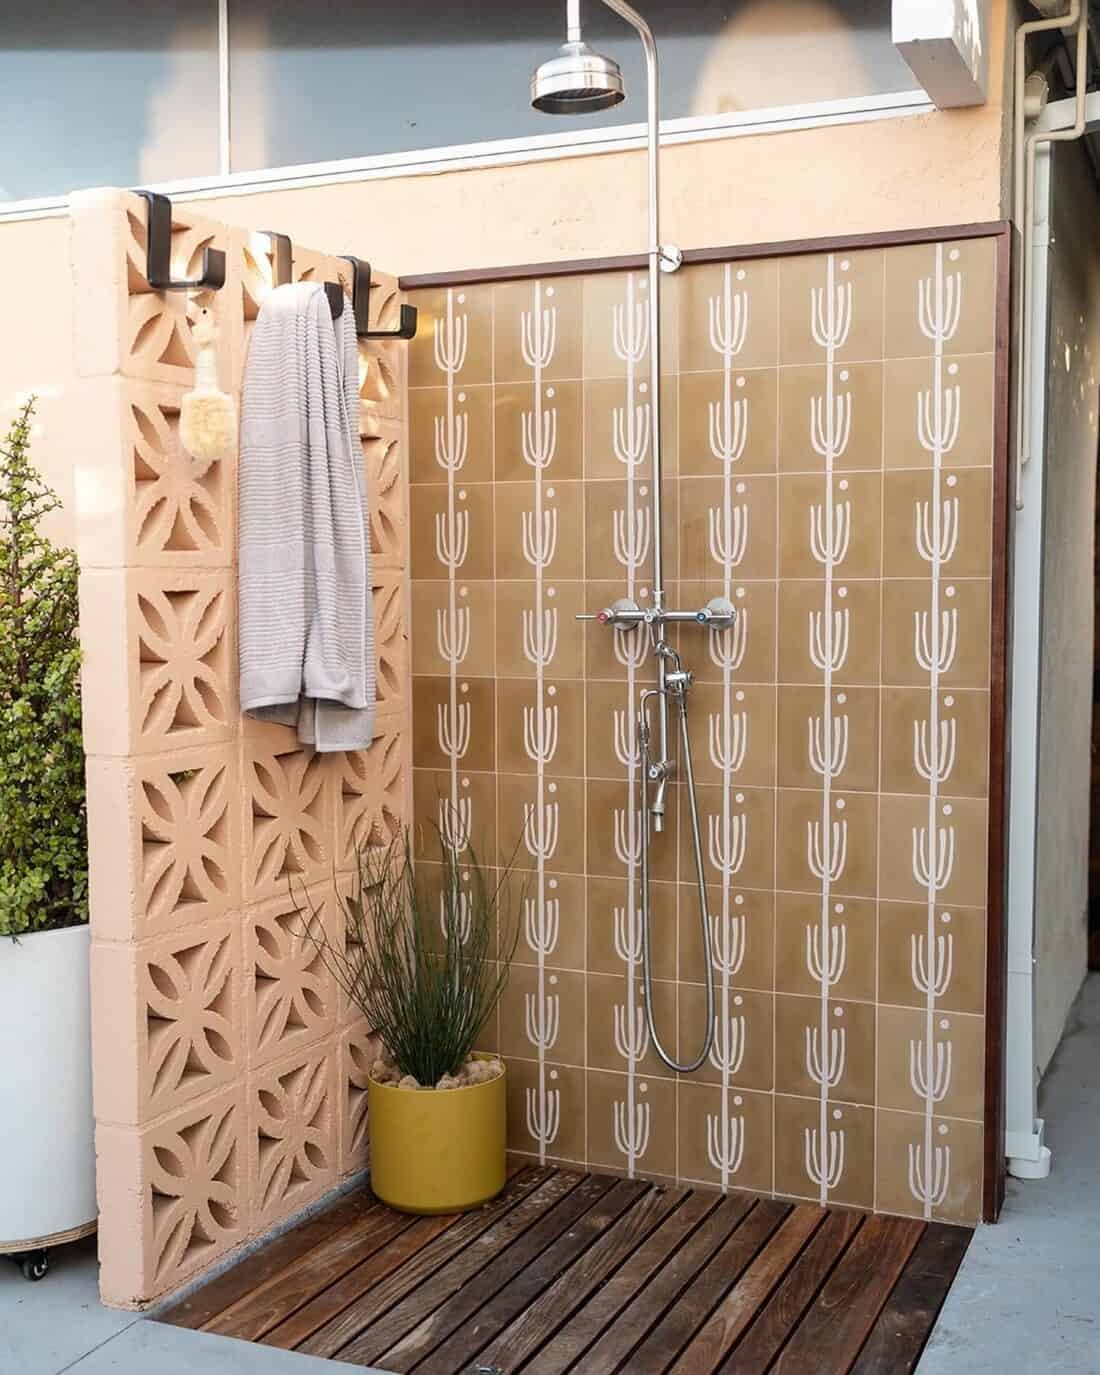 Outdoor shower setup with decorative beige tiles featuring a cactus pattern, designed for those looking to cool off, a wooden floor, a hanging towel, and a potted plant by the side.